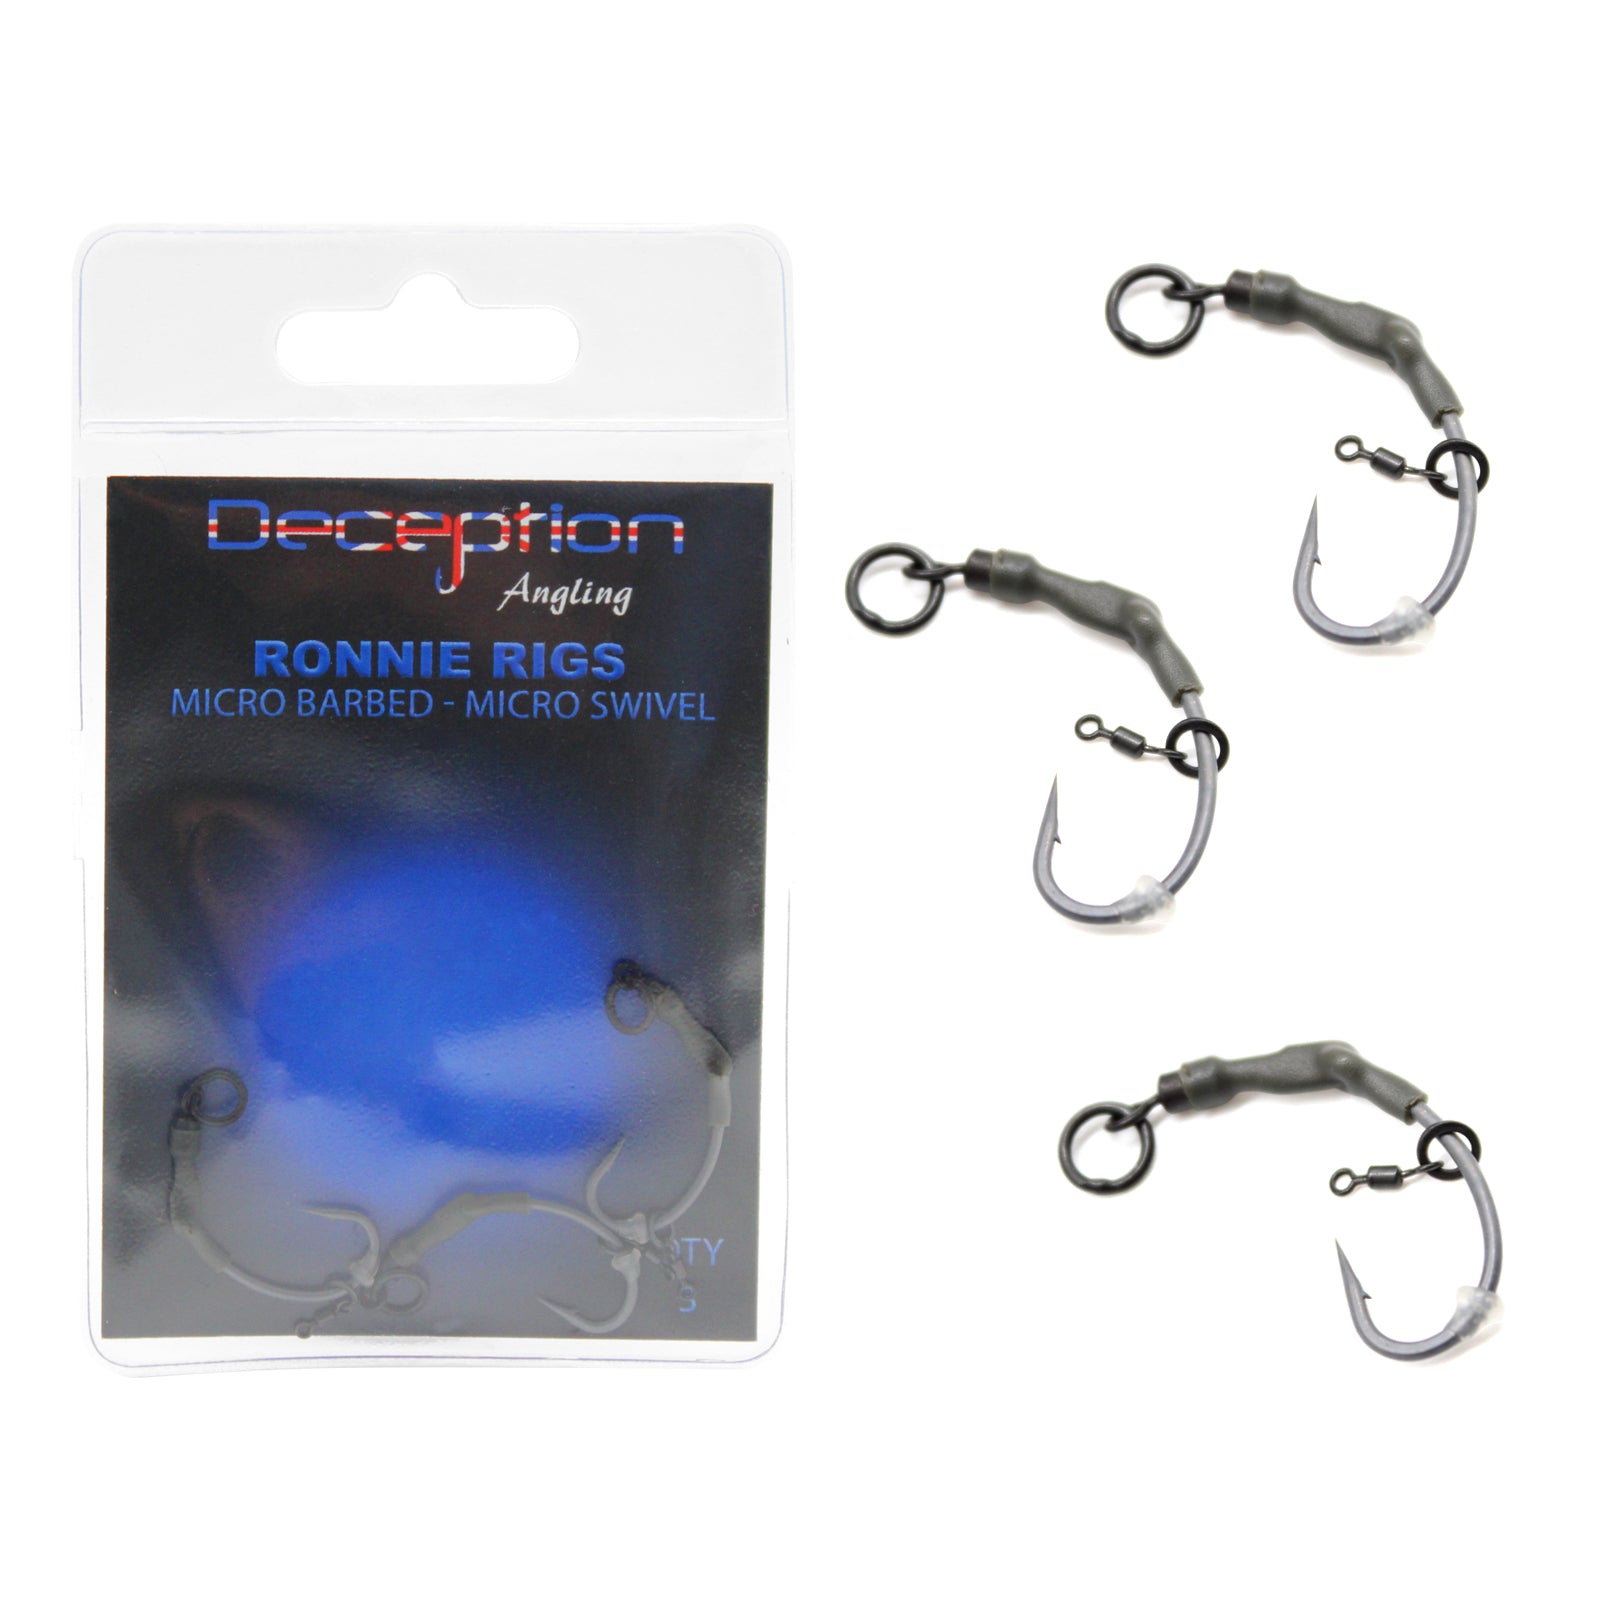 Ronnie Rigs Micro Barbed with Micro Swivel Fishing Hooks